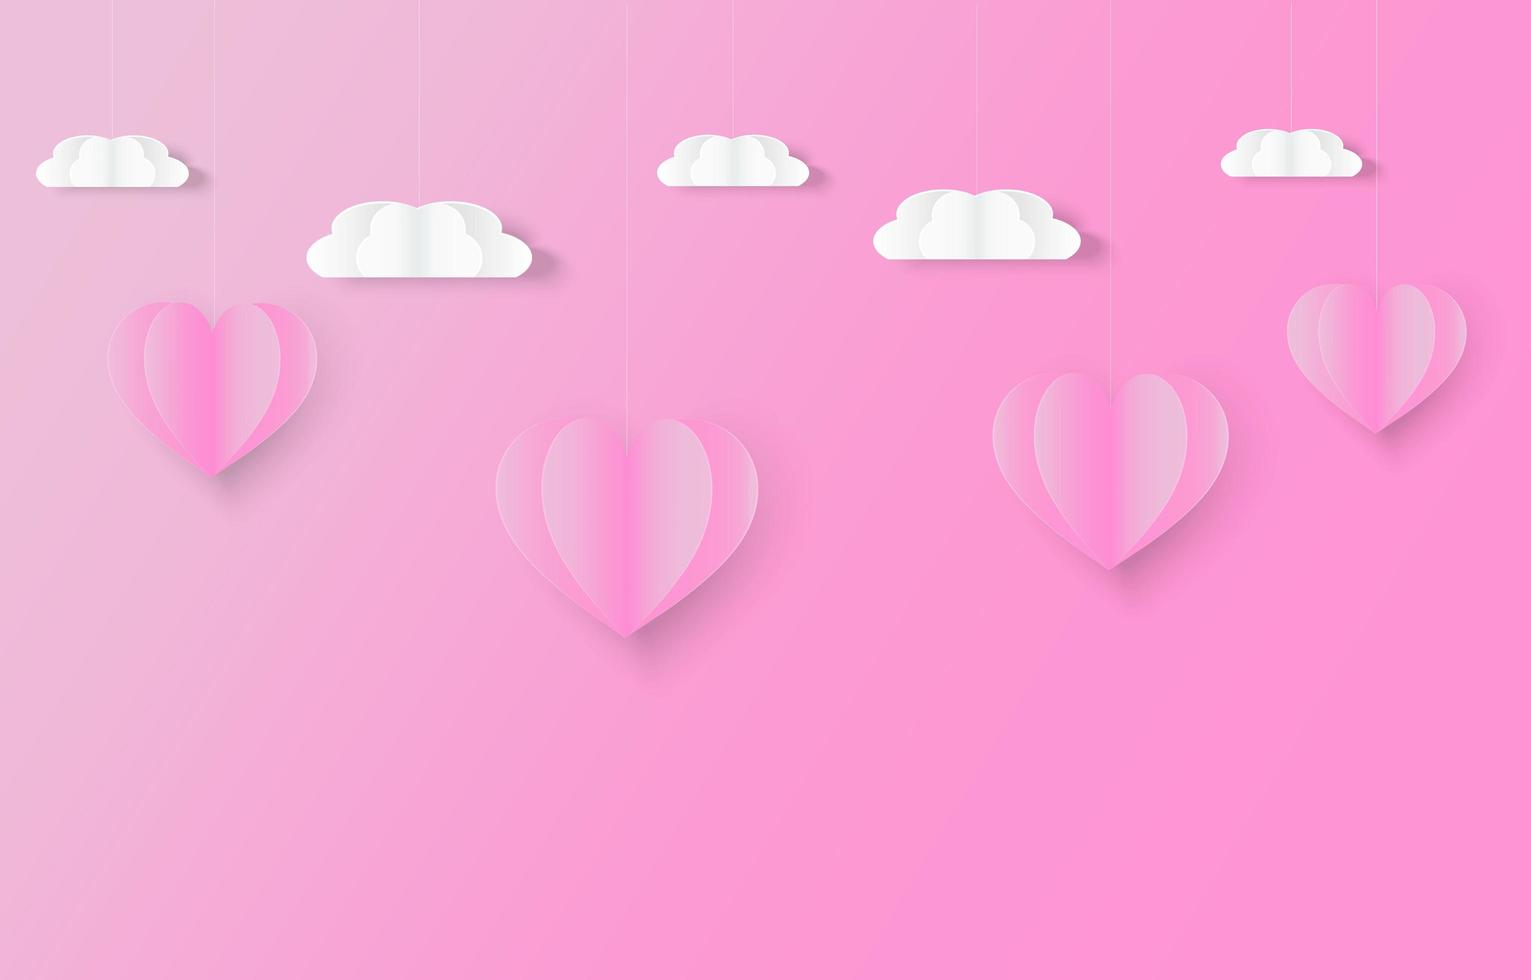 Pink hearts and clouds in paper cut style vector